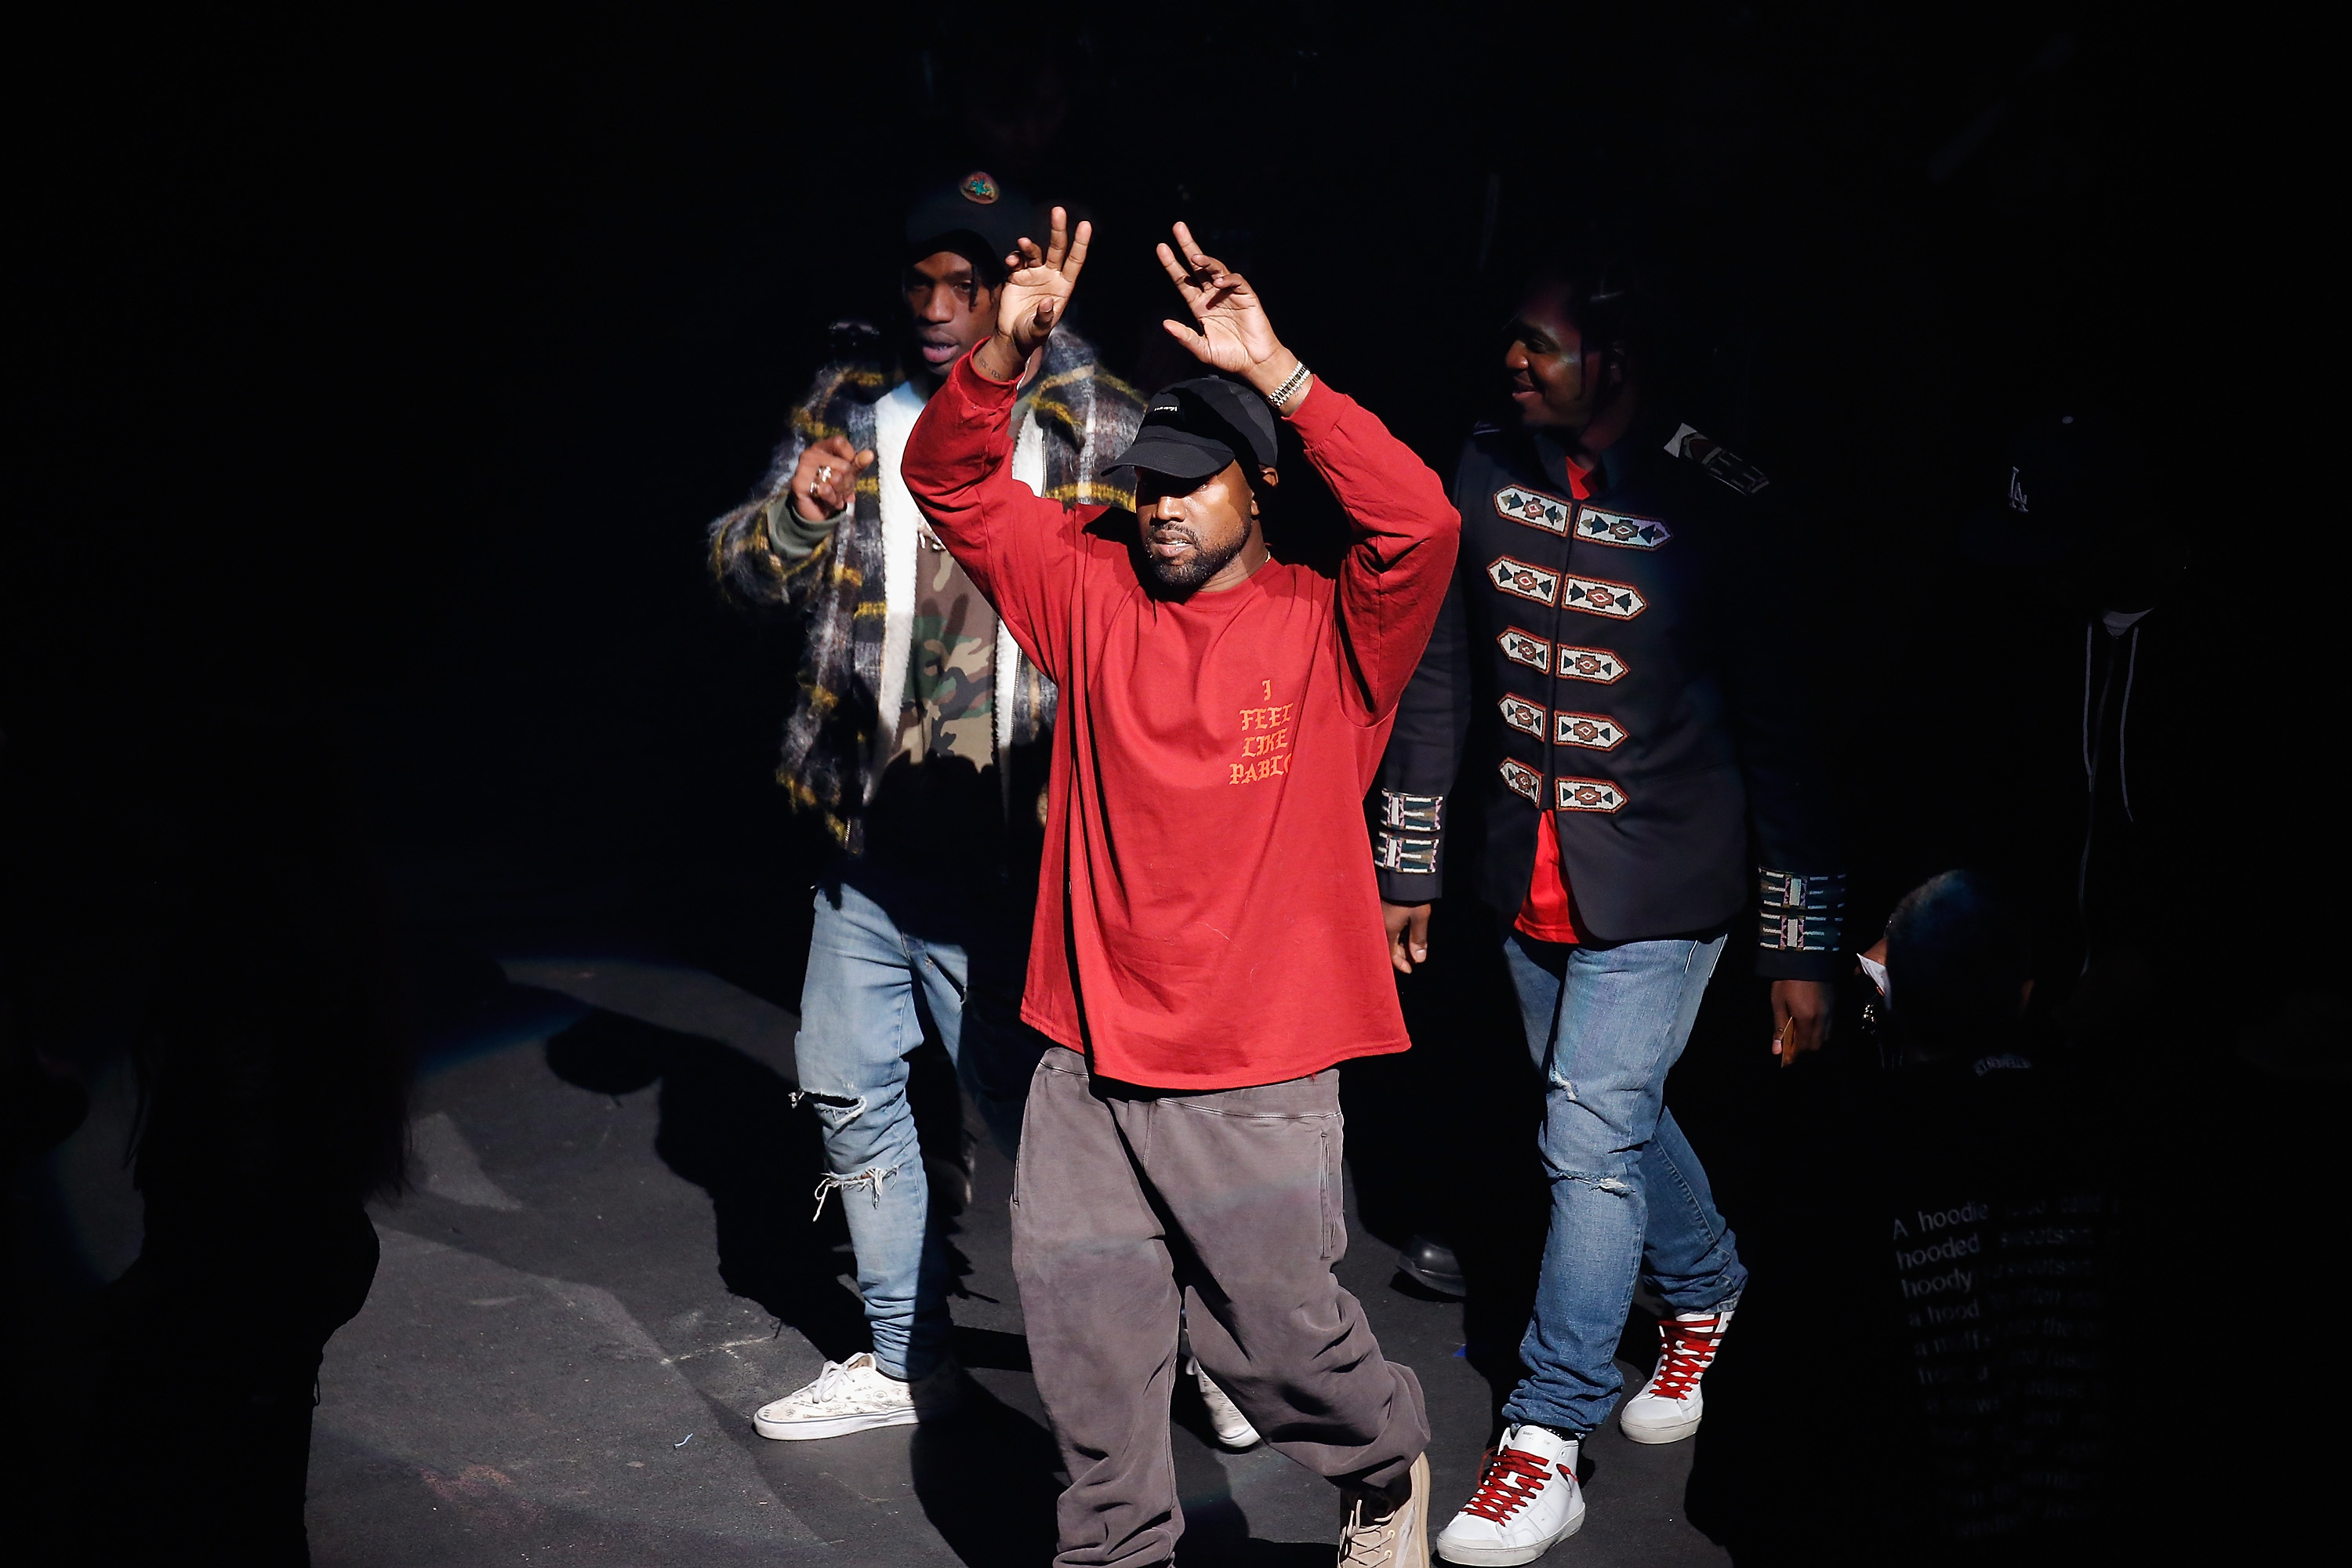 Kanye West performs during Kanye West Yeezy Season 3 on February 11, 2016 in New York City. (JP Yim—Getty Images for Yeezy Season 3)